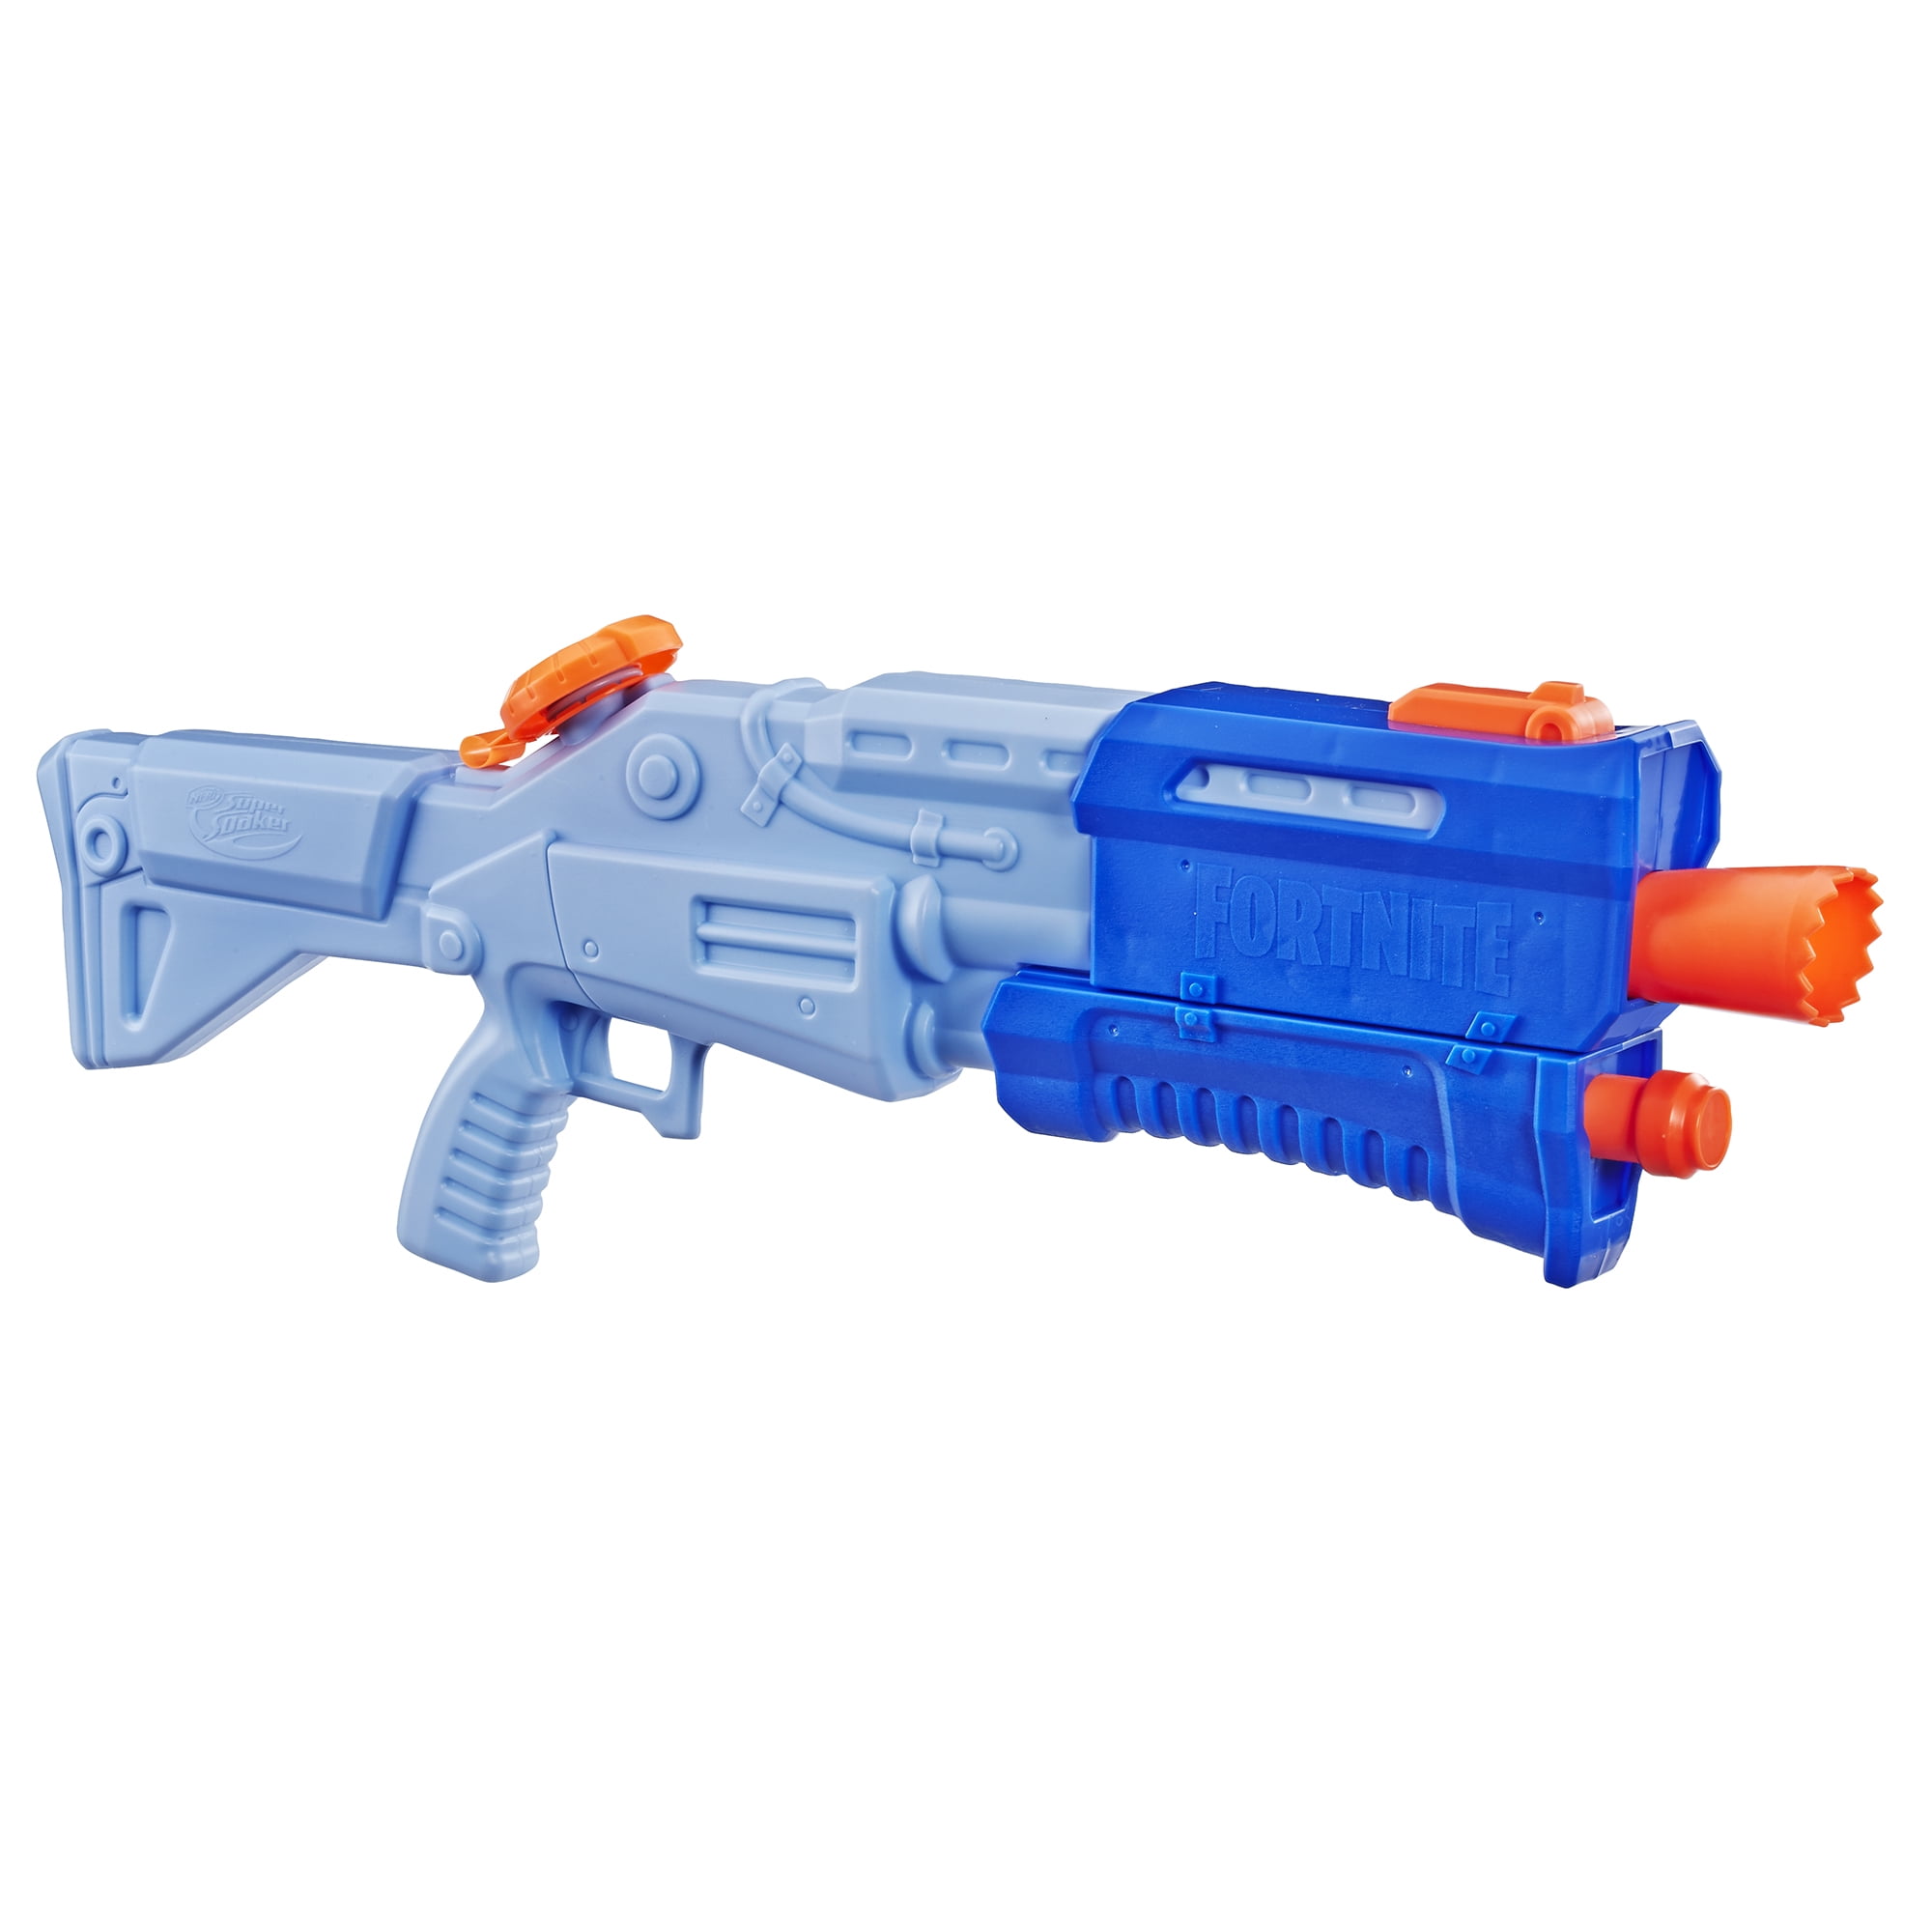 2 Hasbro NERF Super Soaker Micro Burst Water Gun Squirt Toy Stealth Pump for sale online 